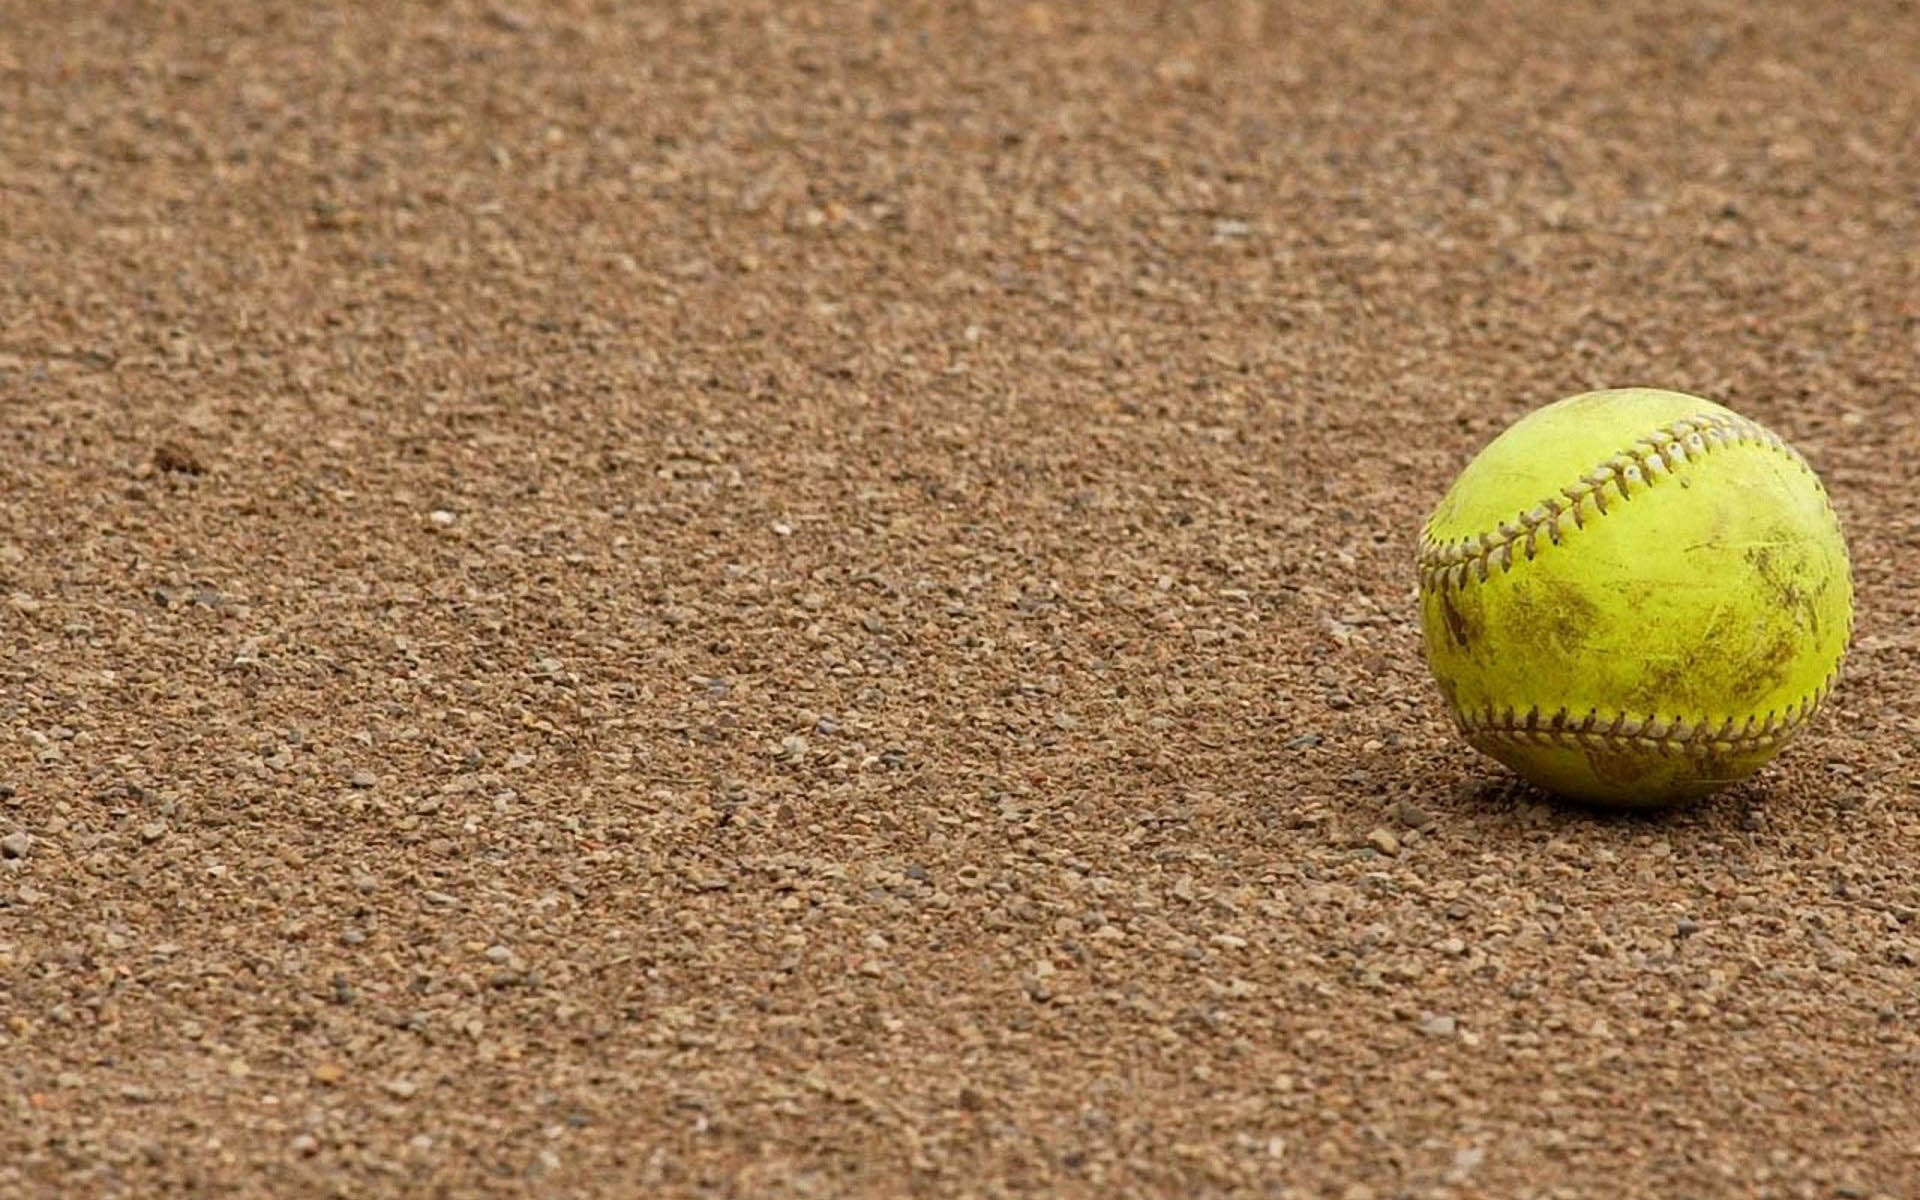 29430 Softball Background Images Stock Photos  Vectors  Shutterstock